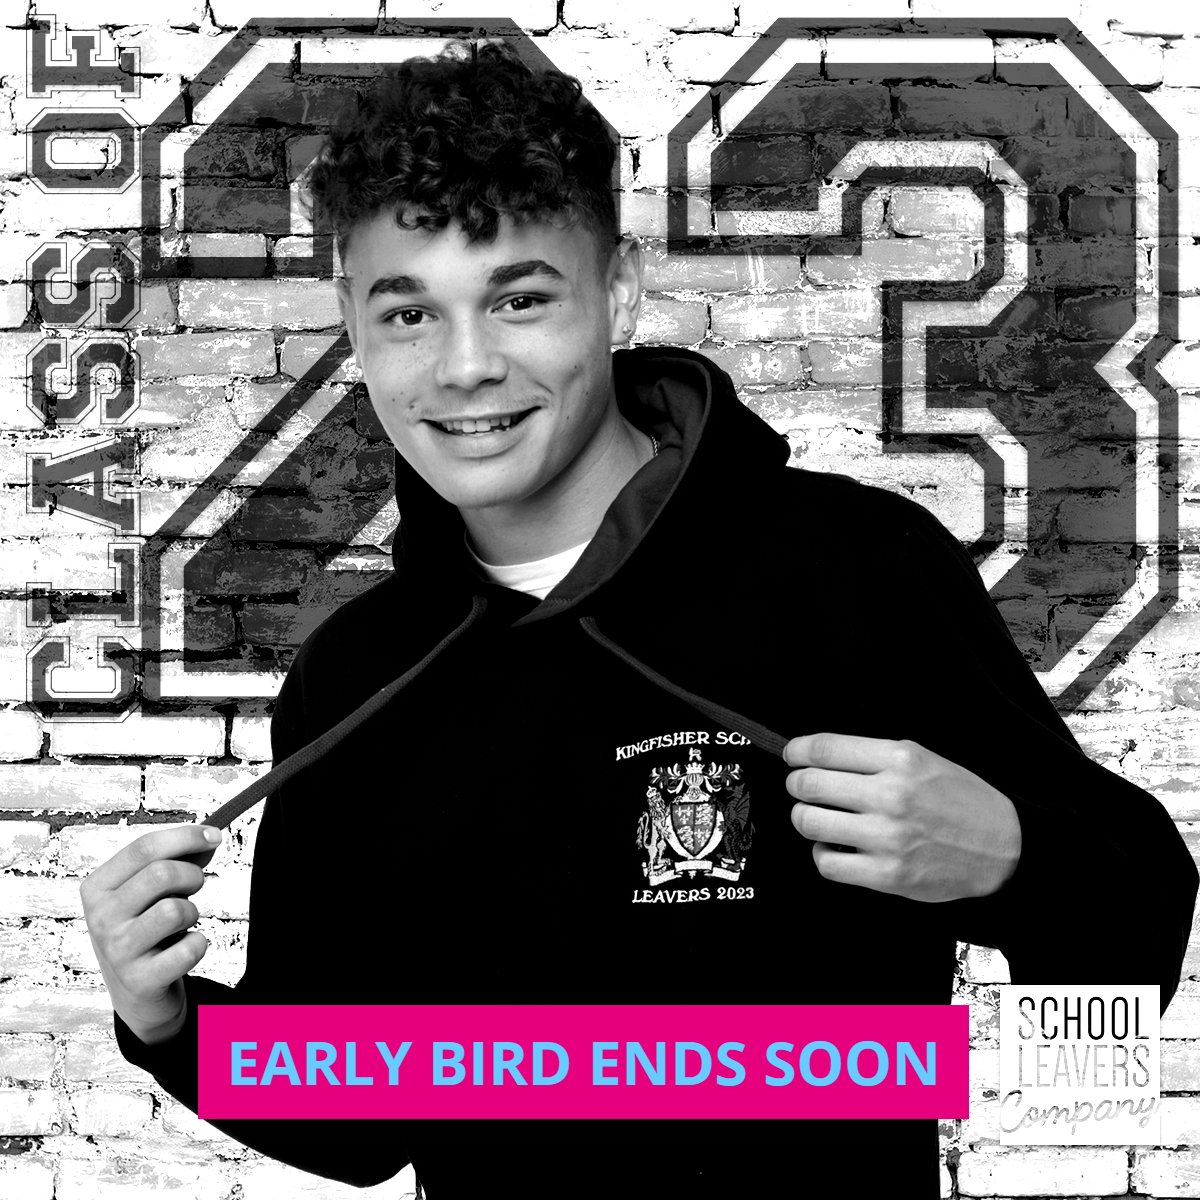 The end of term signals the end of Early Bird rates. Secure your #2023leavershoodies order before prices rise.
schoolleaverscompany.co.uk/leavers-designs

#leavershoodies #classof2023